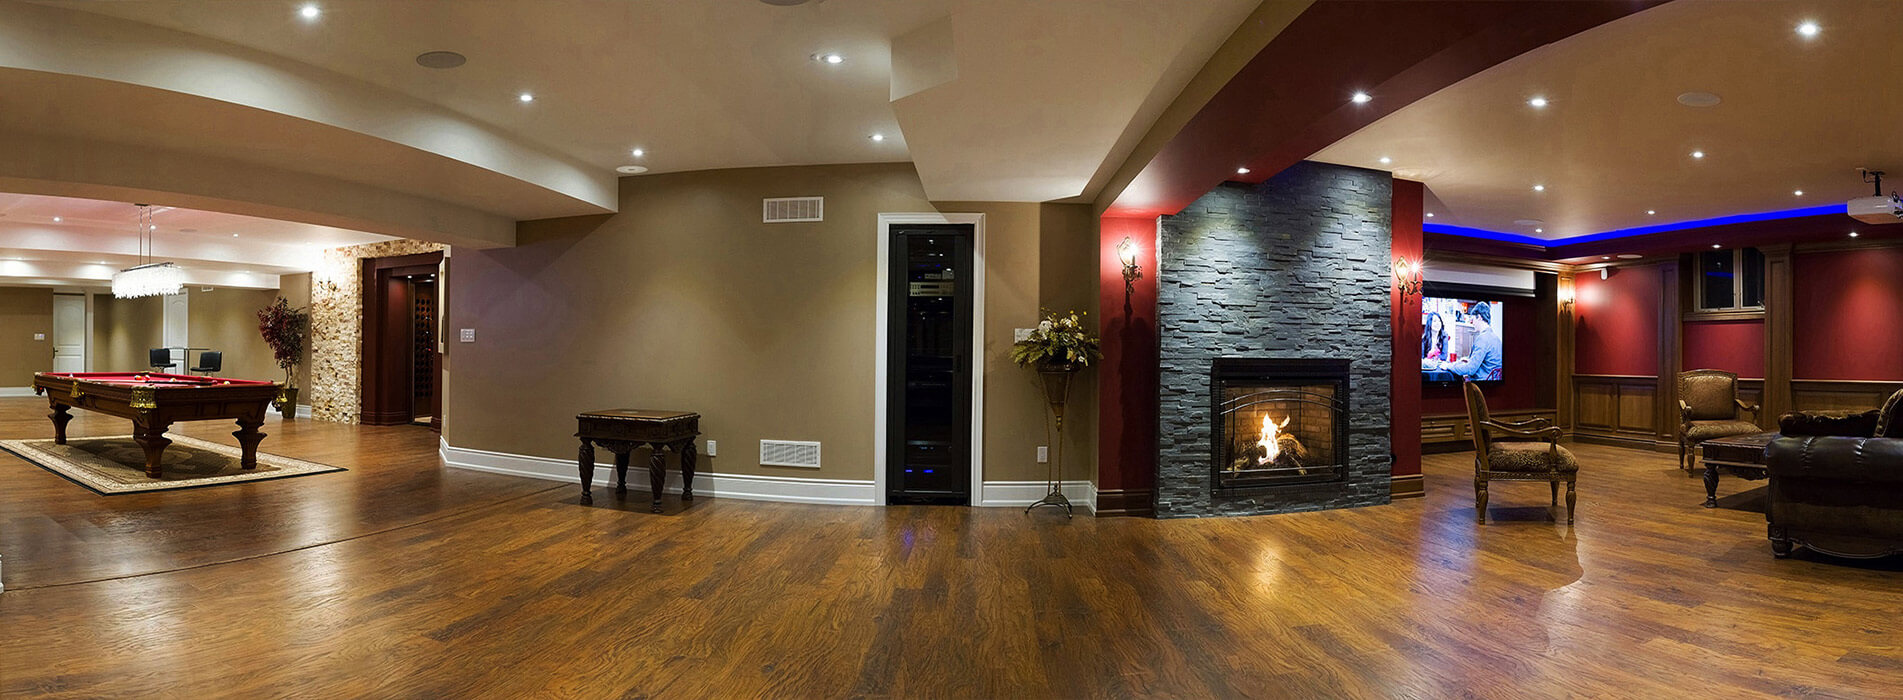 What are some things you should have done before starting basement renovations